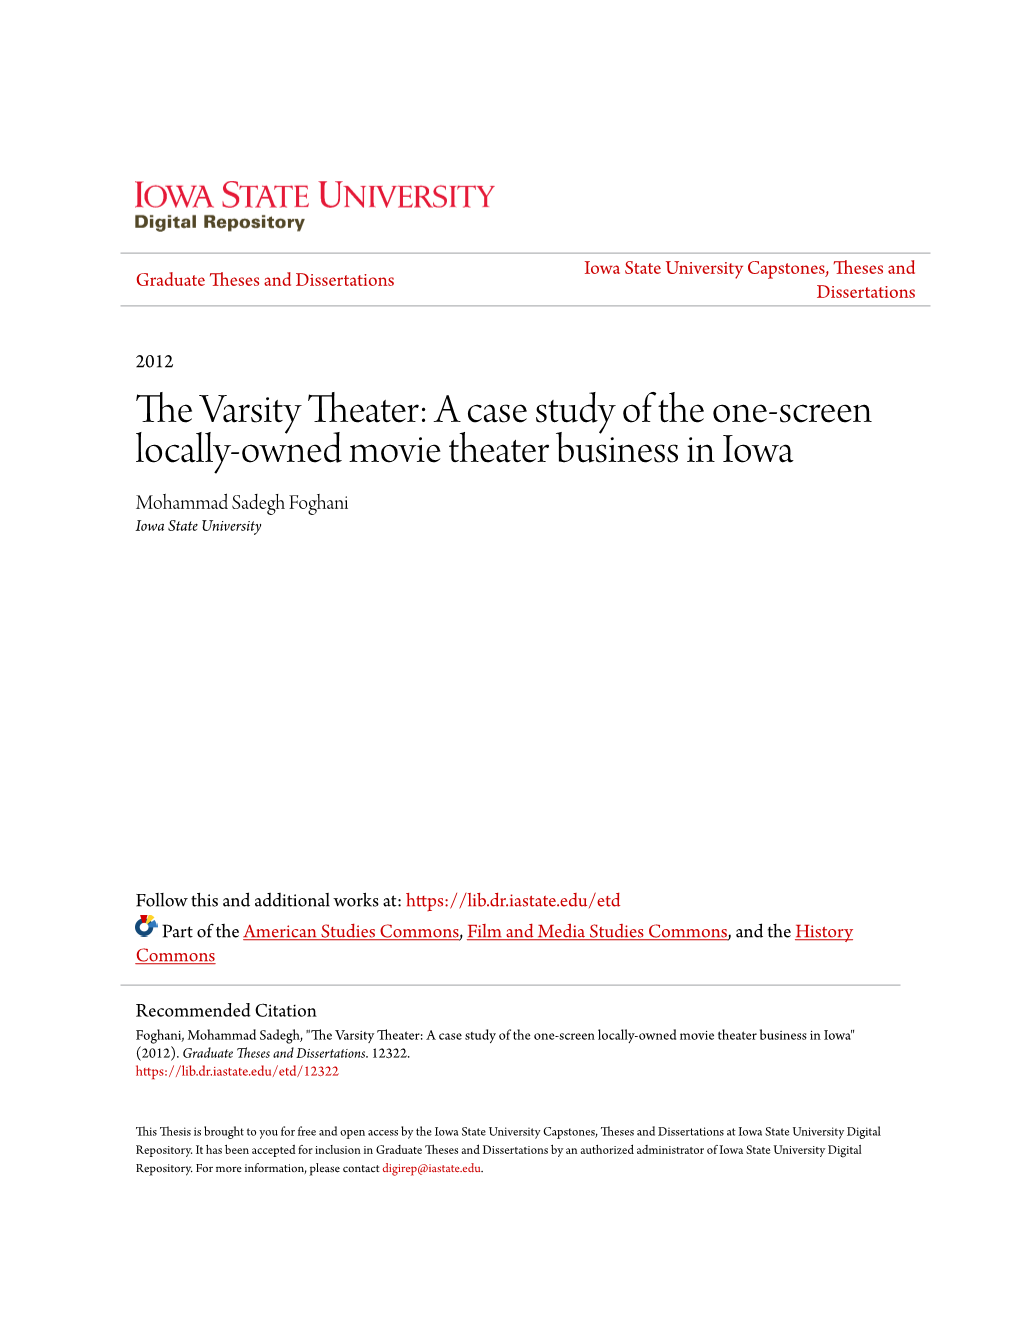 The Varsity Theater: a Case Study of the One-Screen Locally-Owned Movie Theater Business in Iowa